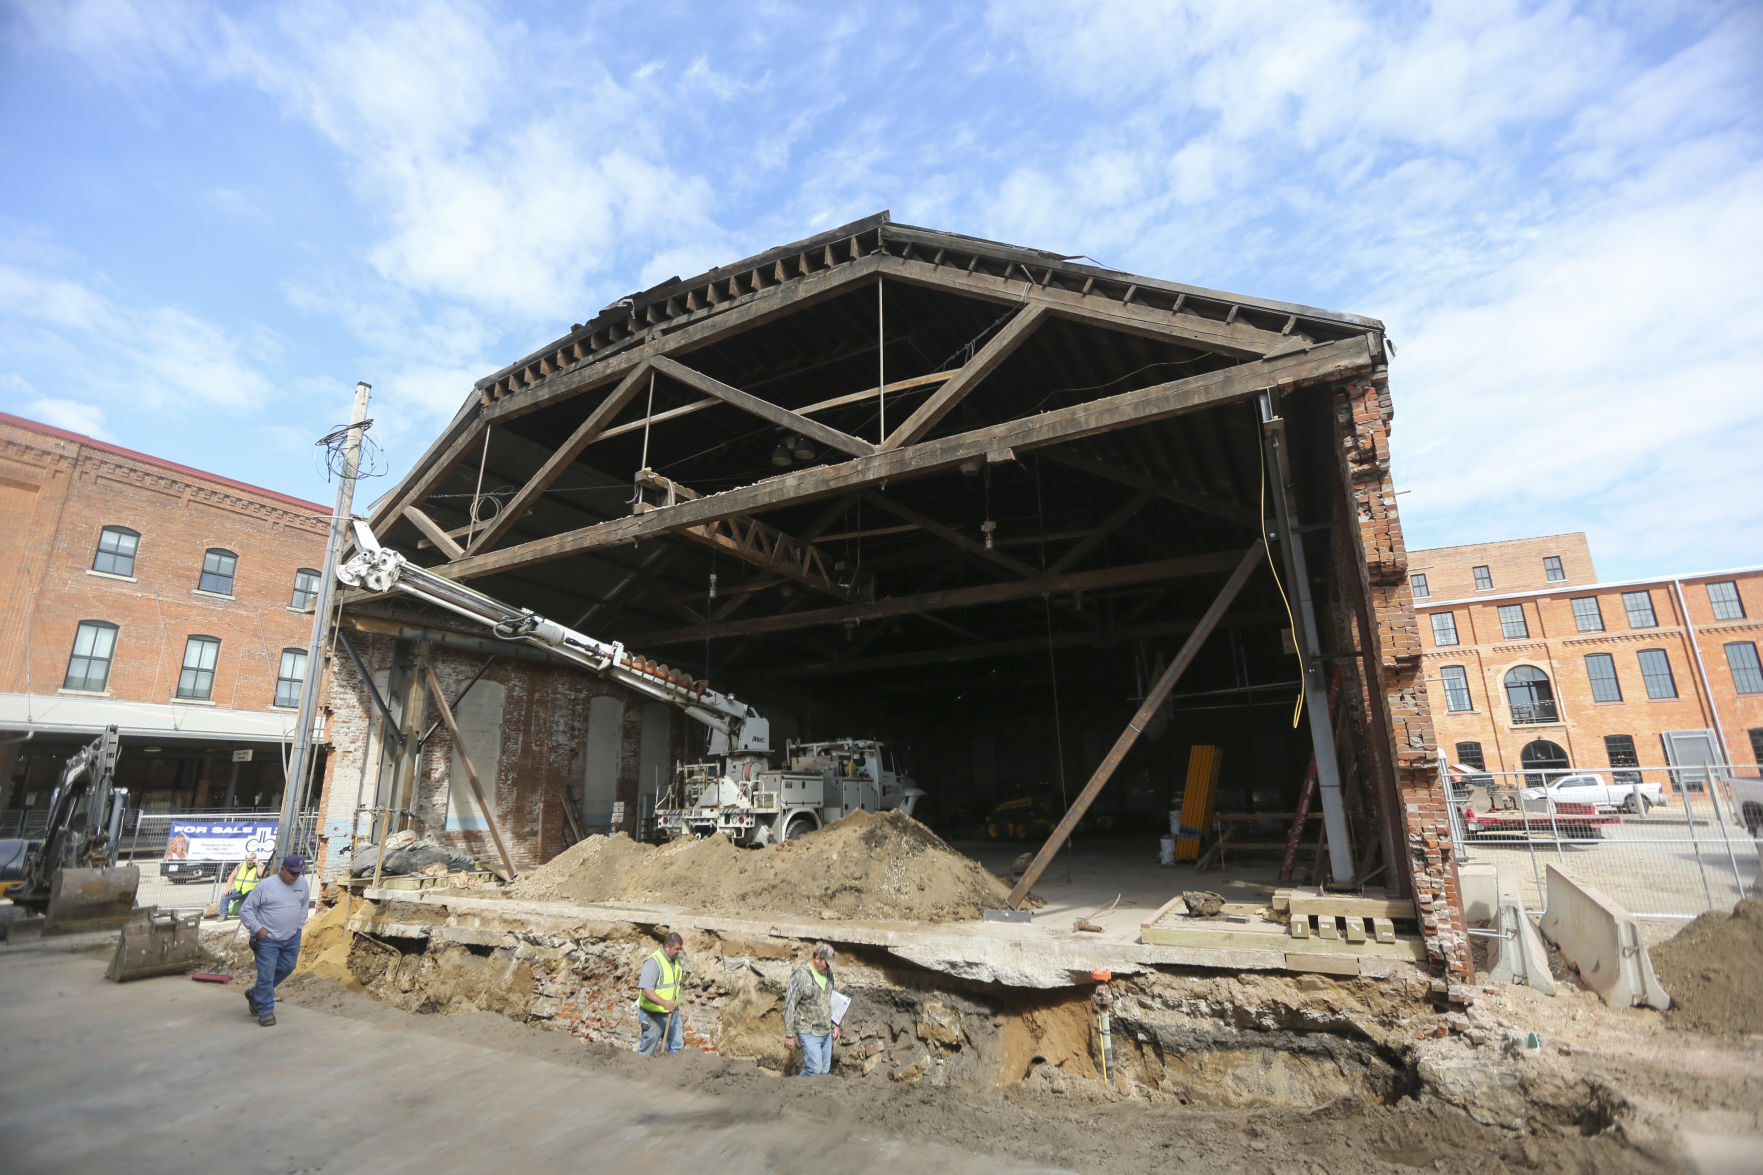 Crews work on the Rouse & Dean Foundry building, a historic structure being redeveloped at the corner of Washington and East 10th streets in Dubuque. PHOTO CREDIT: Dave Kettering